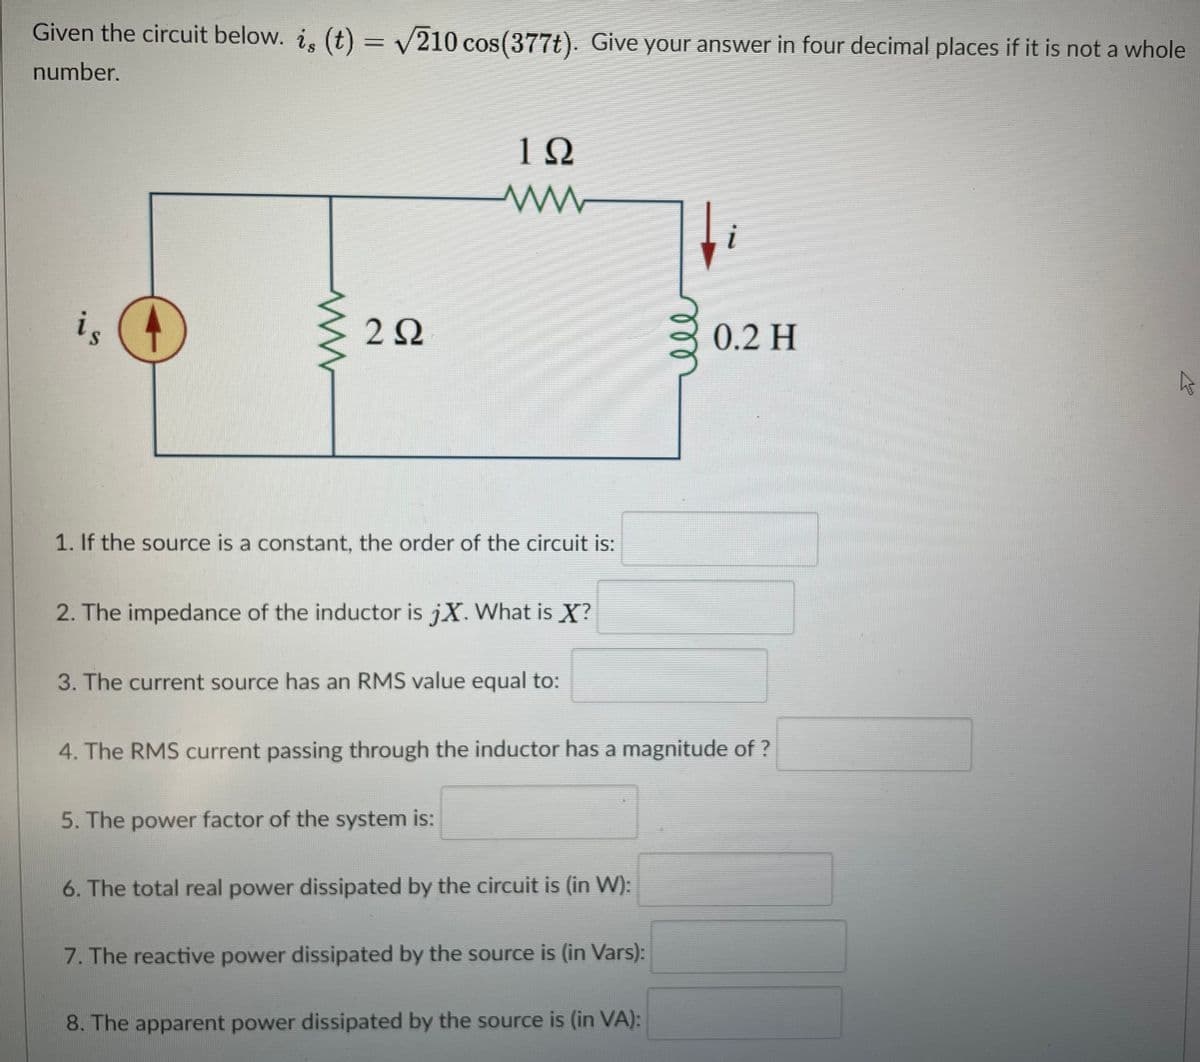 Given the circuit below. i, (t) = V210 cos(377t). Give your answer in four decimal places if it is not a whole
number.
1Ω
i
is
0.2 H
1. If the source is a constant, the order of the circuit is:
2. The impedance of the inductor is jX. What is X?
3. The current source has an RMS value equal to:
4. The RMS current passing through the inductor has a magnitude of ?
5. The power factor of the system is:
6. The total real power dissipated by the circuit is (in W):
7. The reactive power dissipated by the source is (in Vars):
8. The apparent power dissipated by the source is (in VA):
